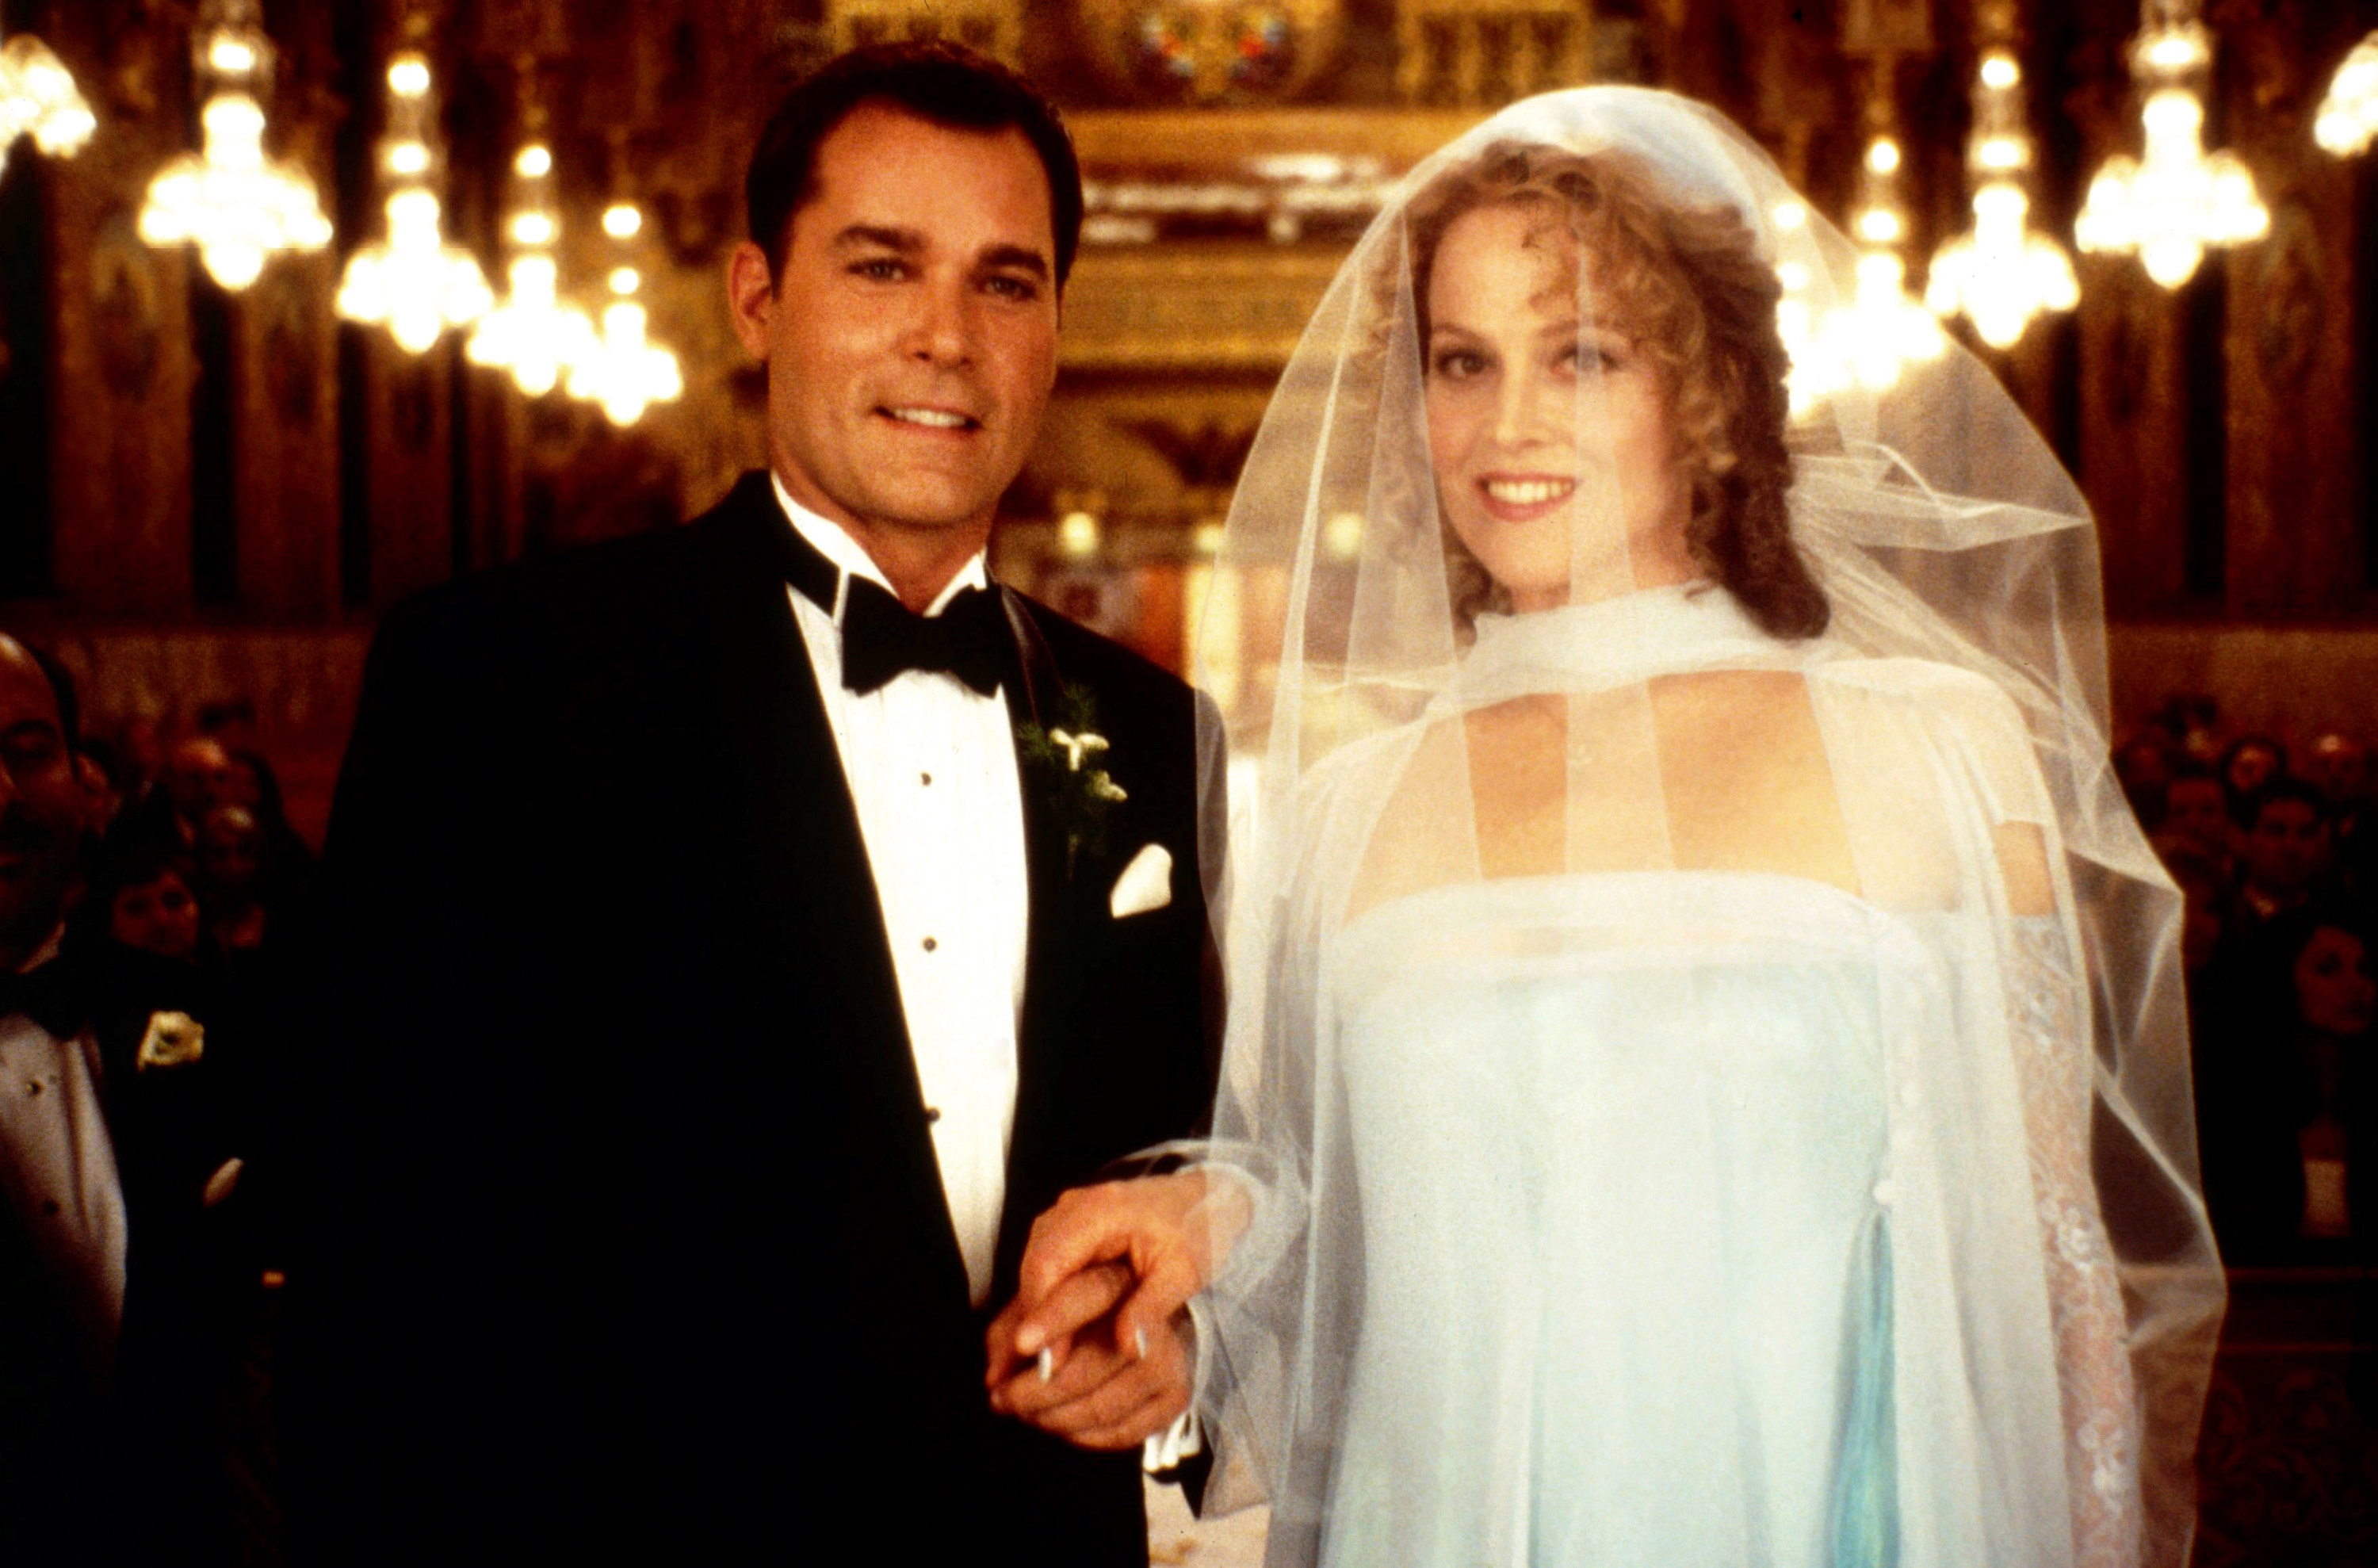 Ray and Sigourney as groom and bride in a movie